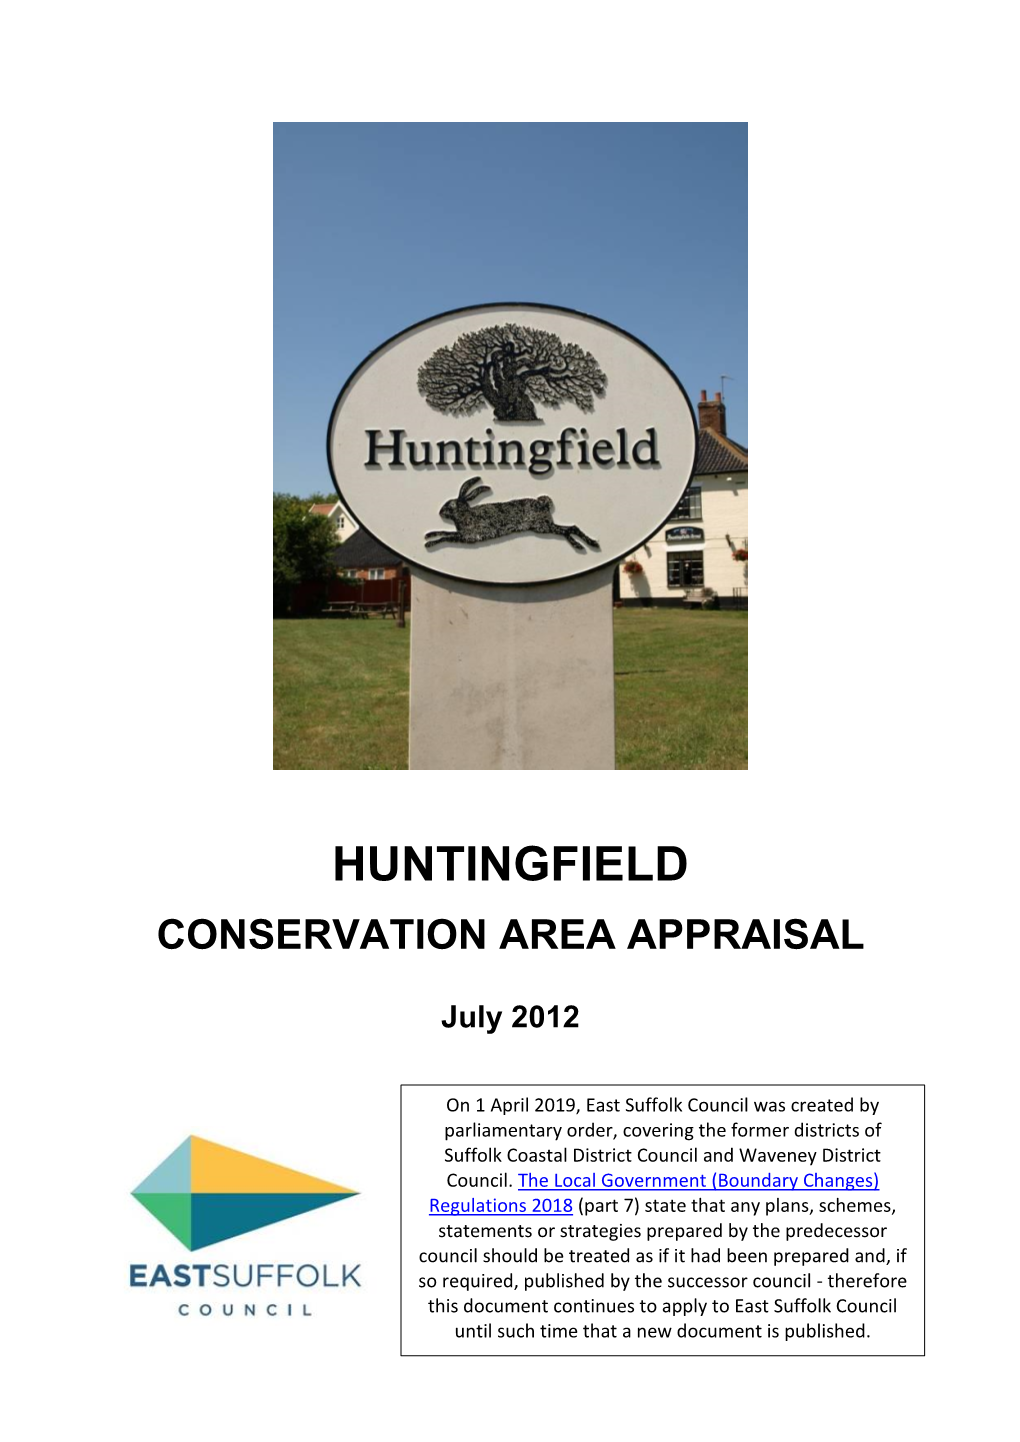 Huntingfield Conservation Area Appraisal